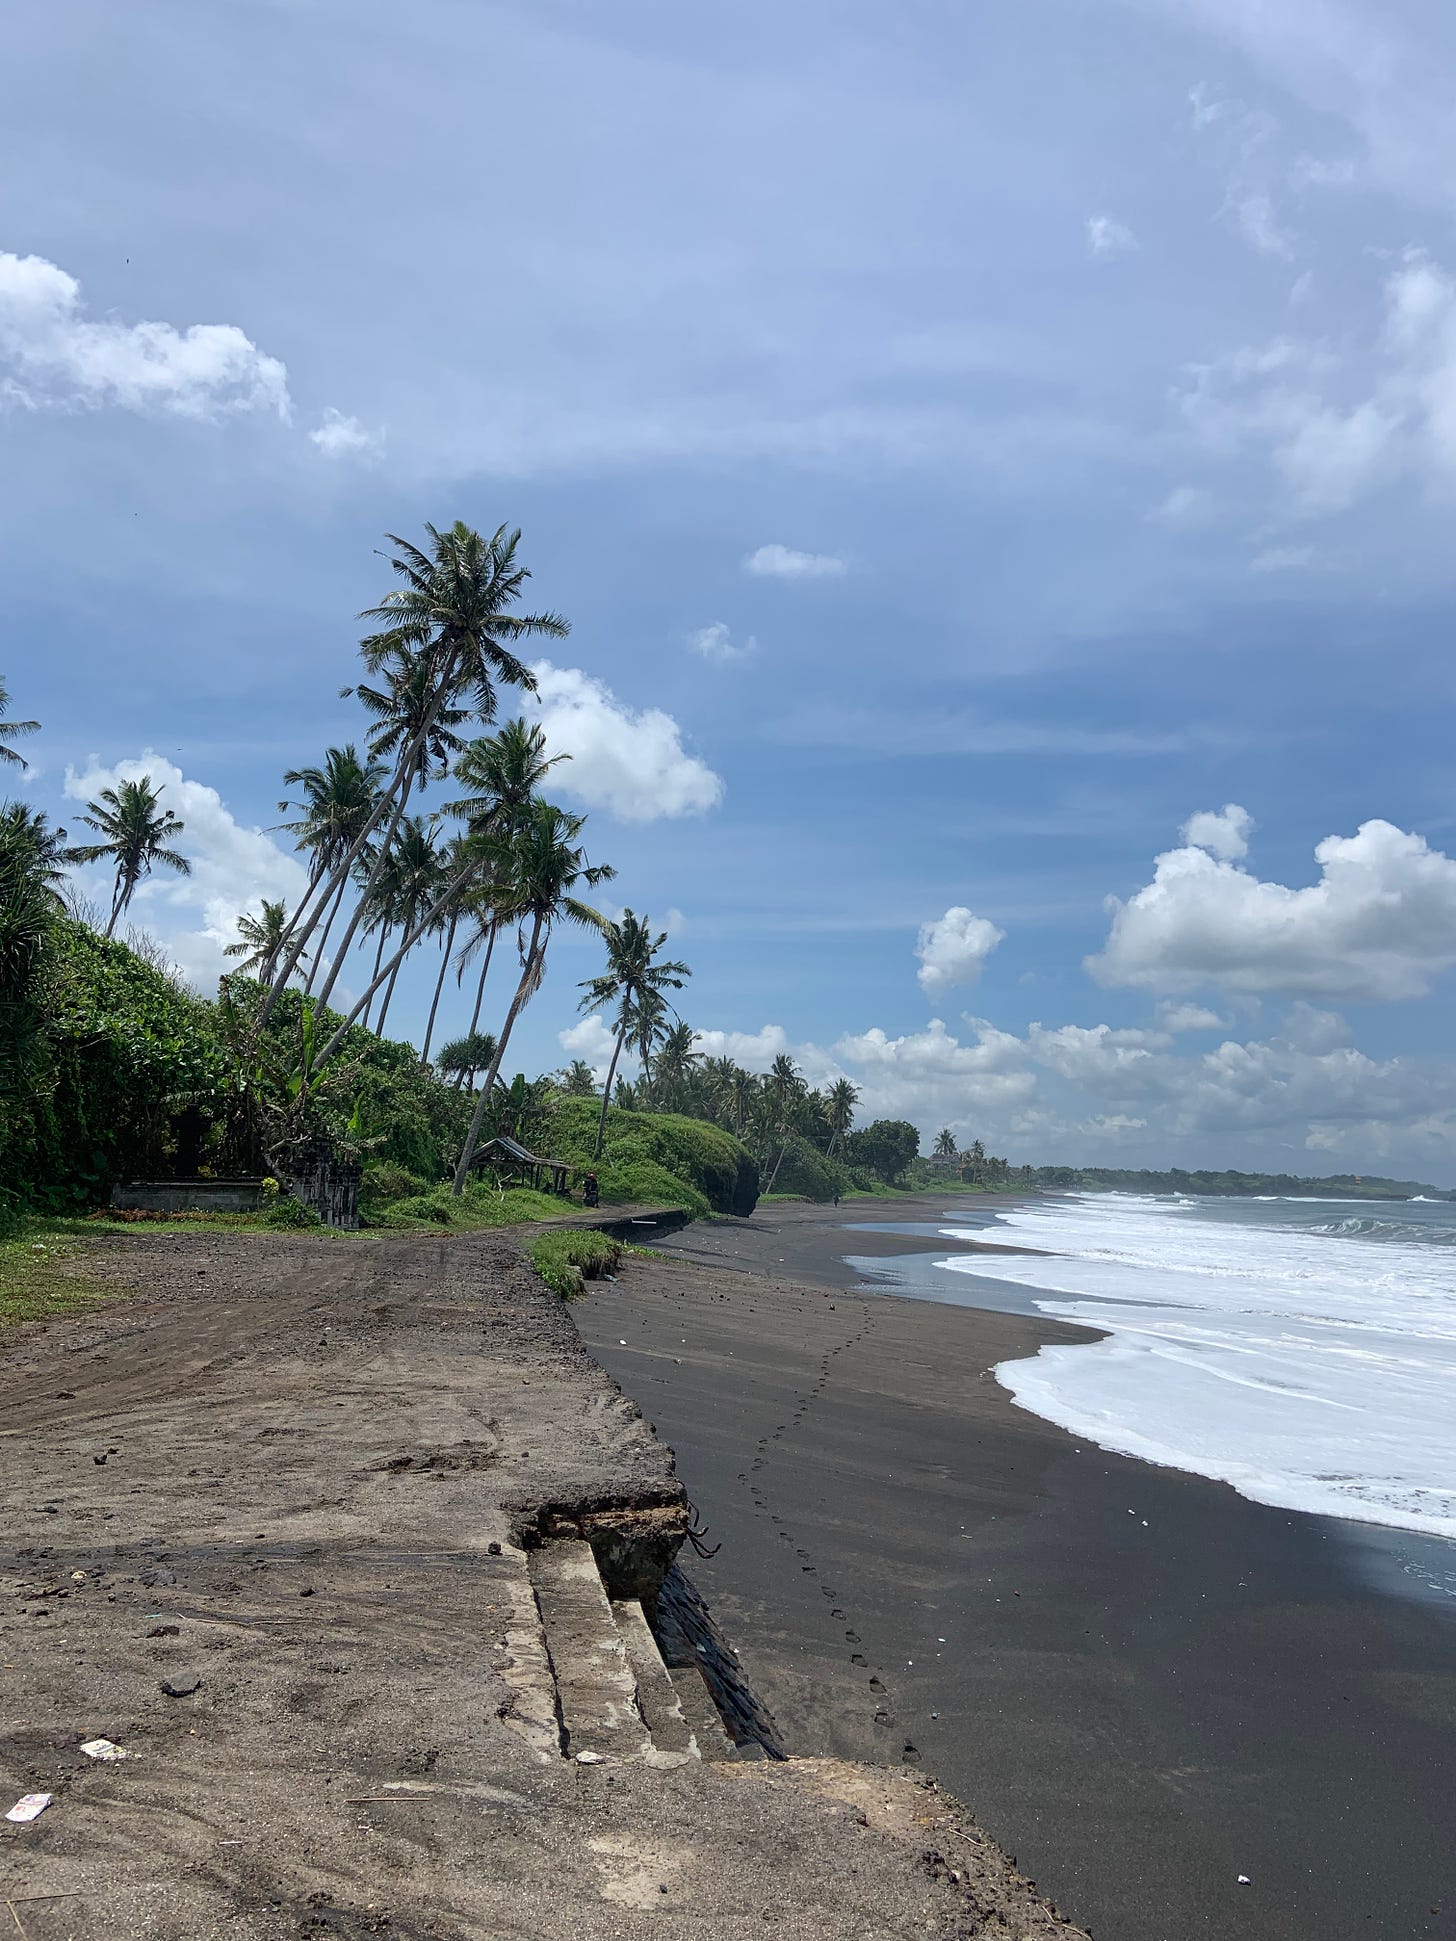 A beach lined with palm trees and footprints in the sand while waves wash onto shore